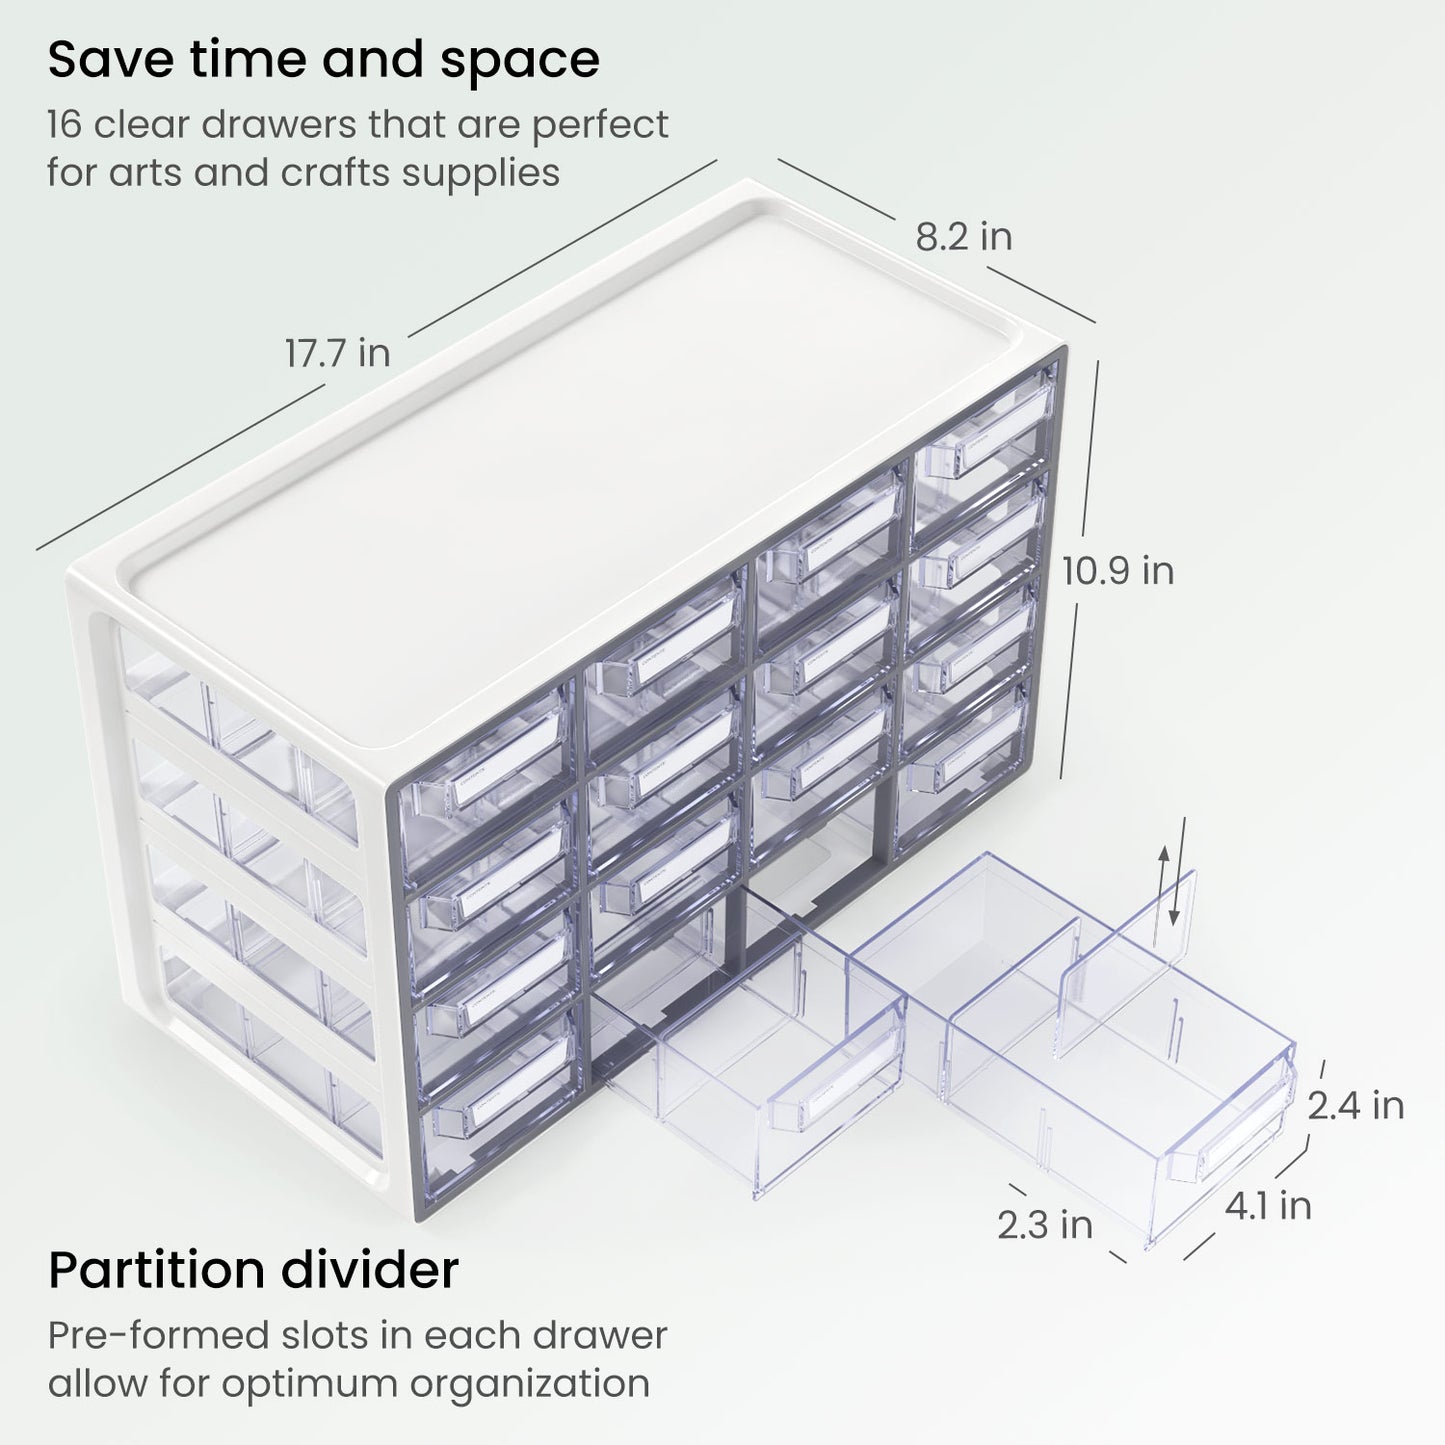 Sizing for 16 Drawer Storage Cabinet